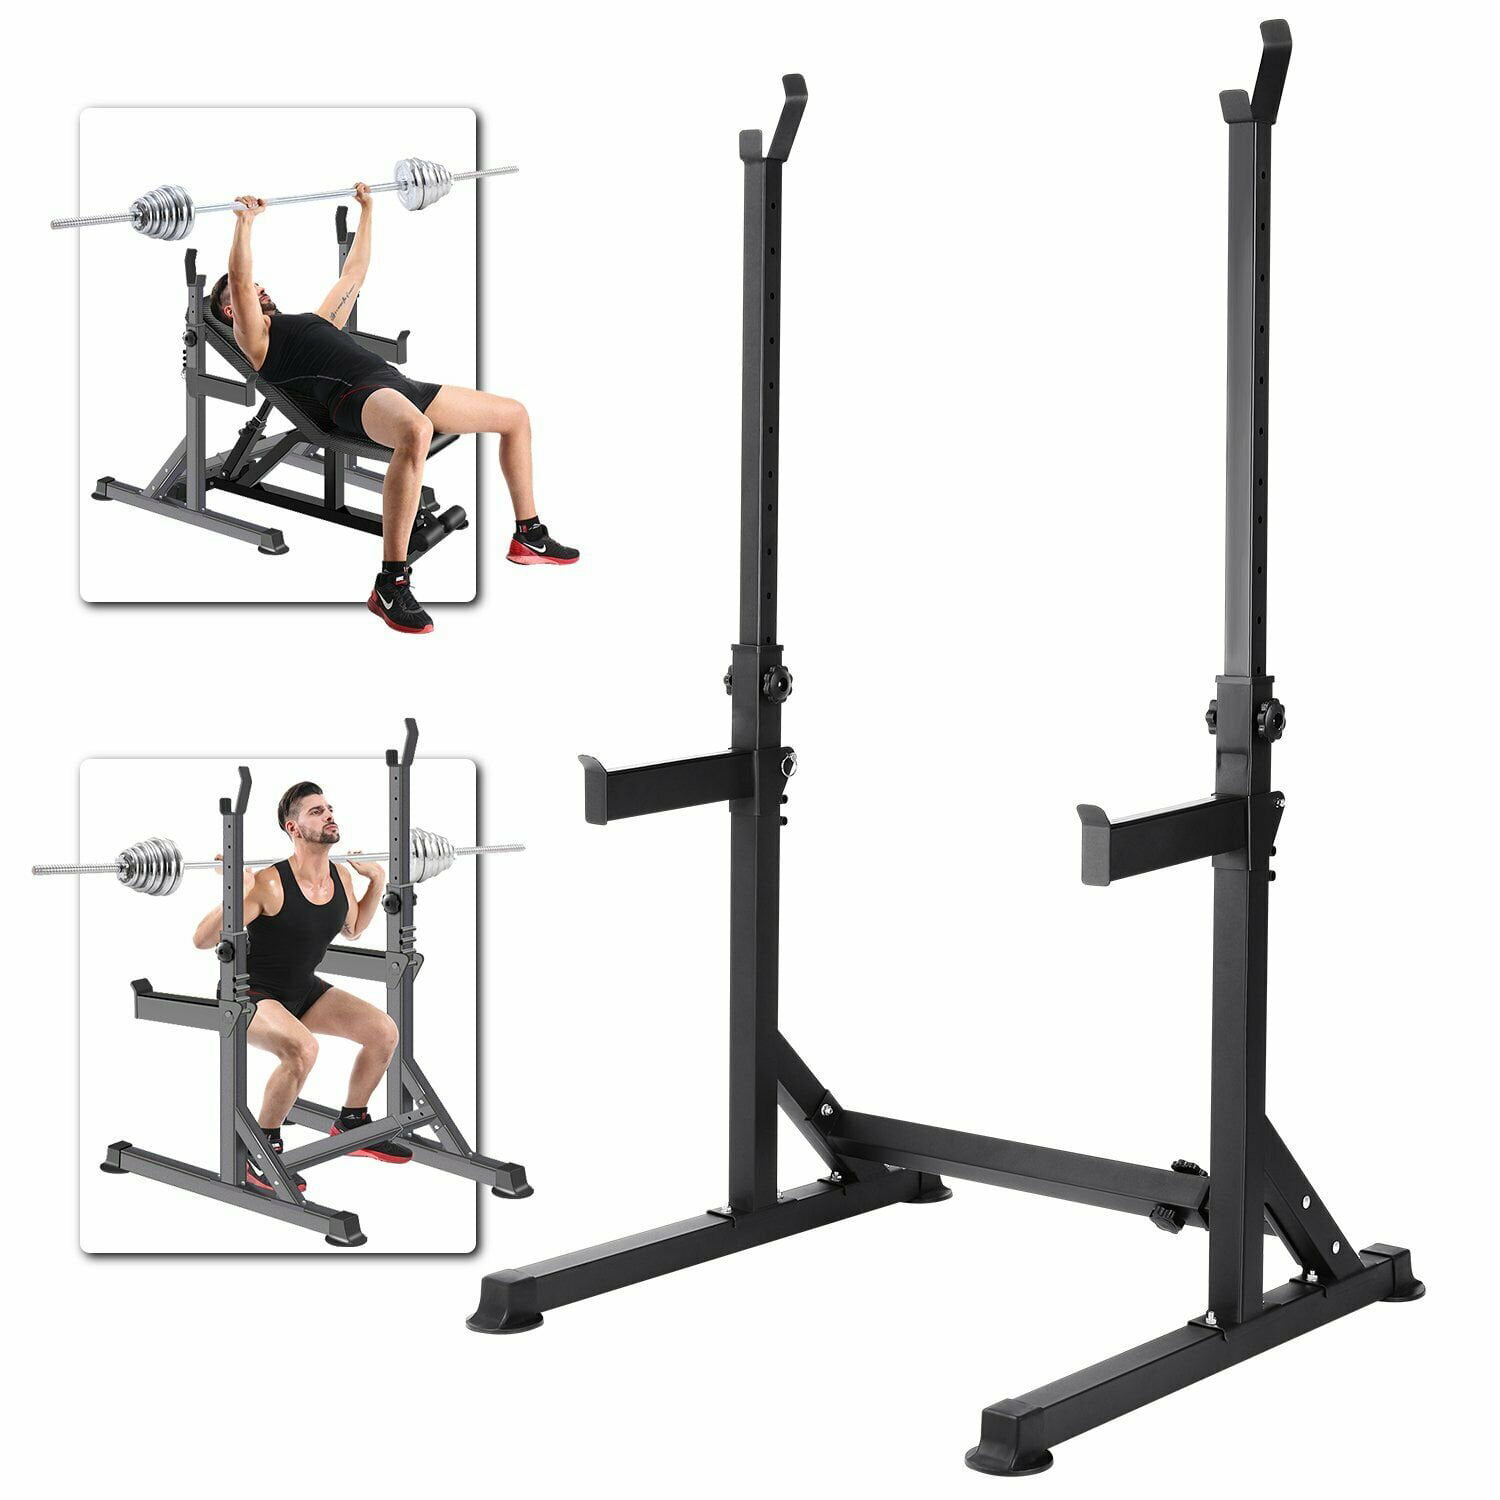 Details about   Body Champ PBC530 Power Rack System with Olympic Weight Plate Storage and Bench 